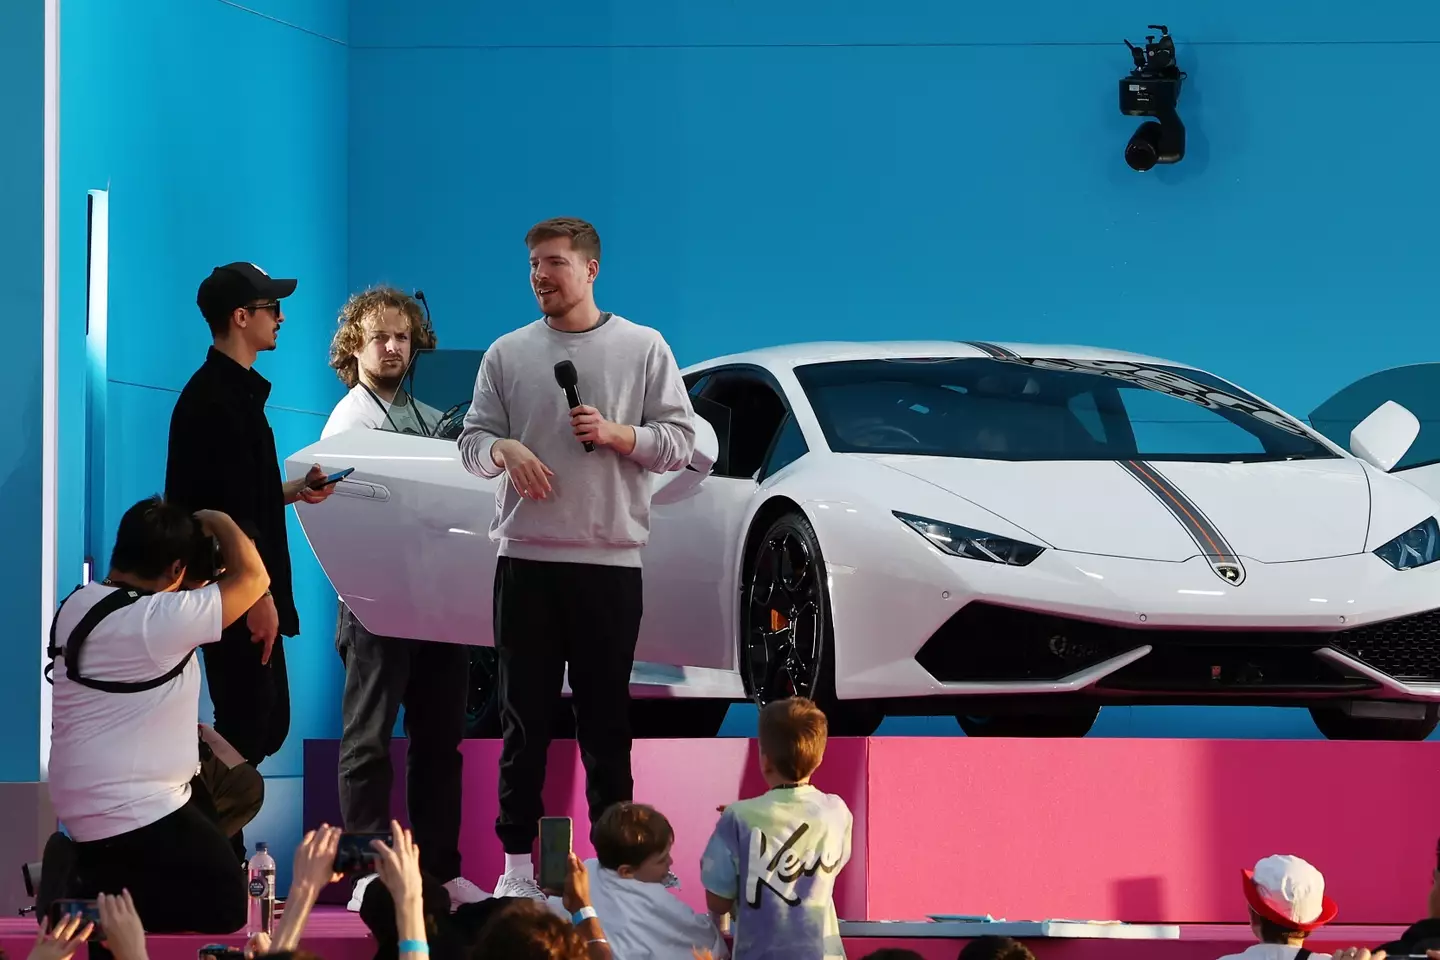 MrBeast recently gifted a series of luxury cars to 10 lucky fans. (Don Arnold/WireImage)